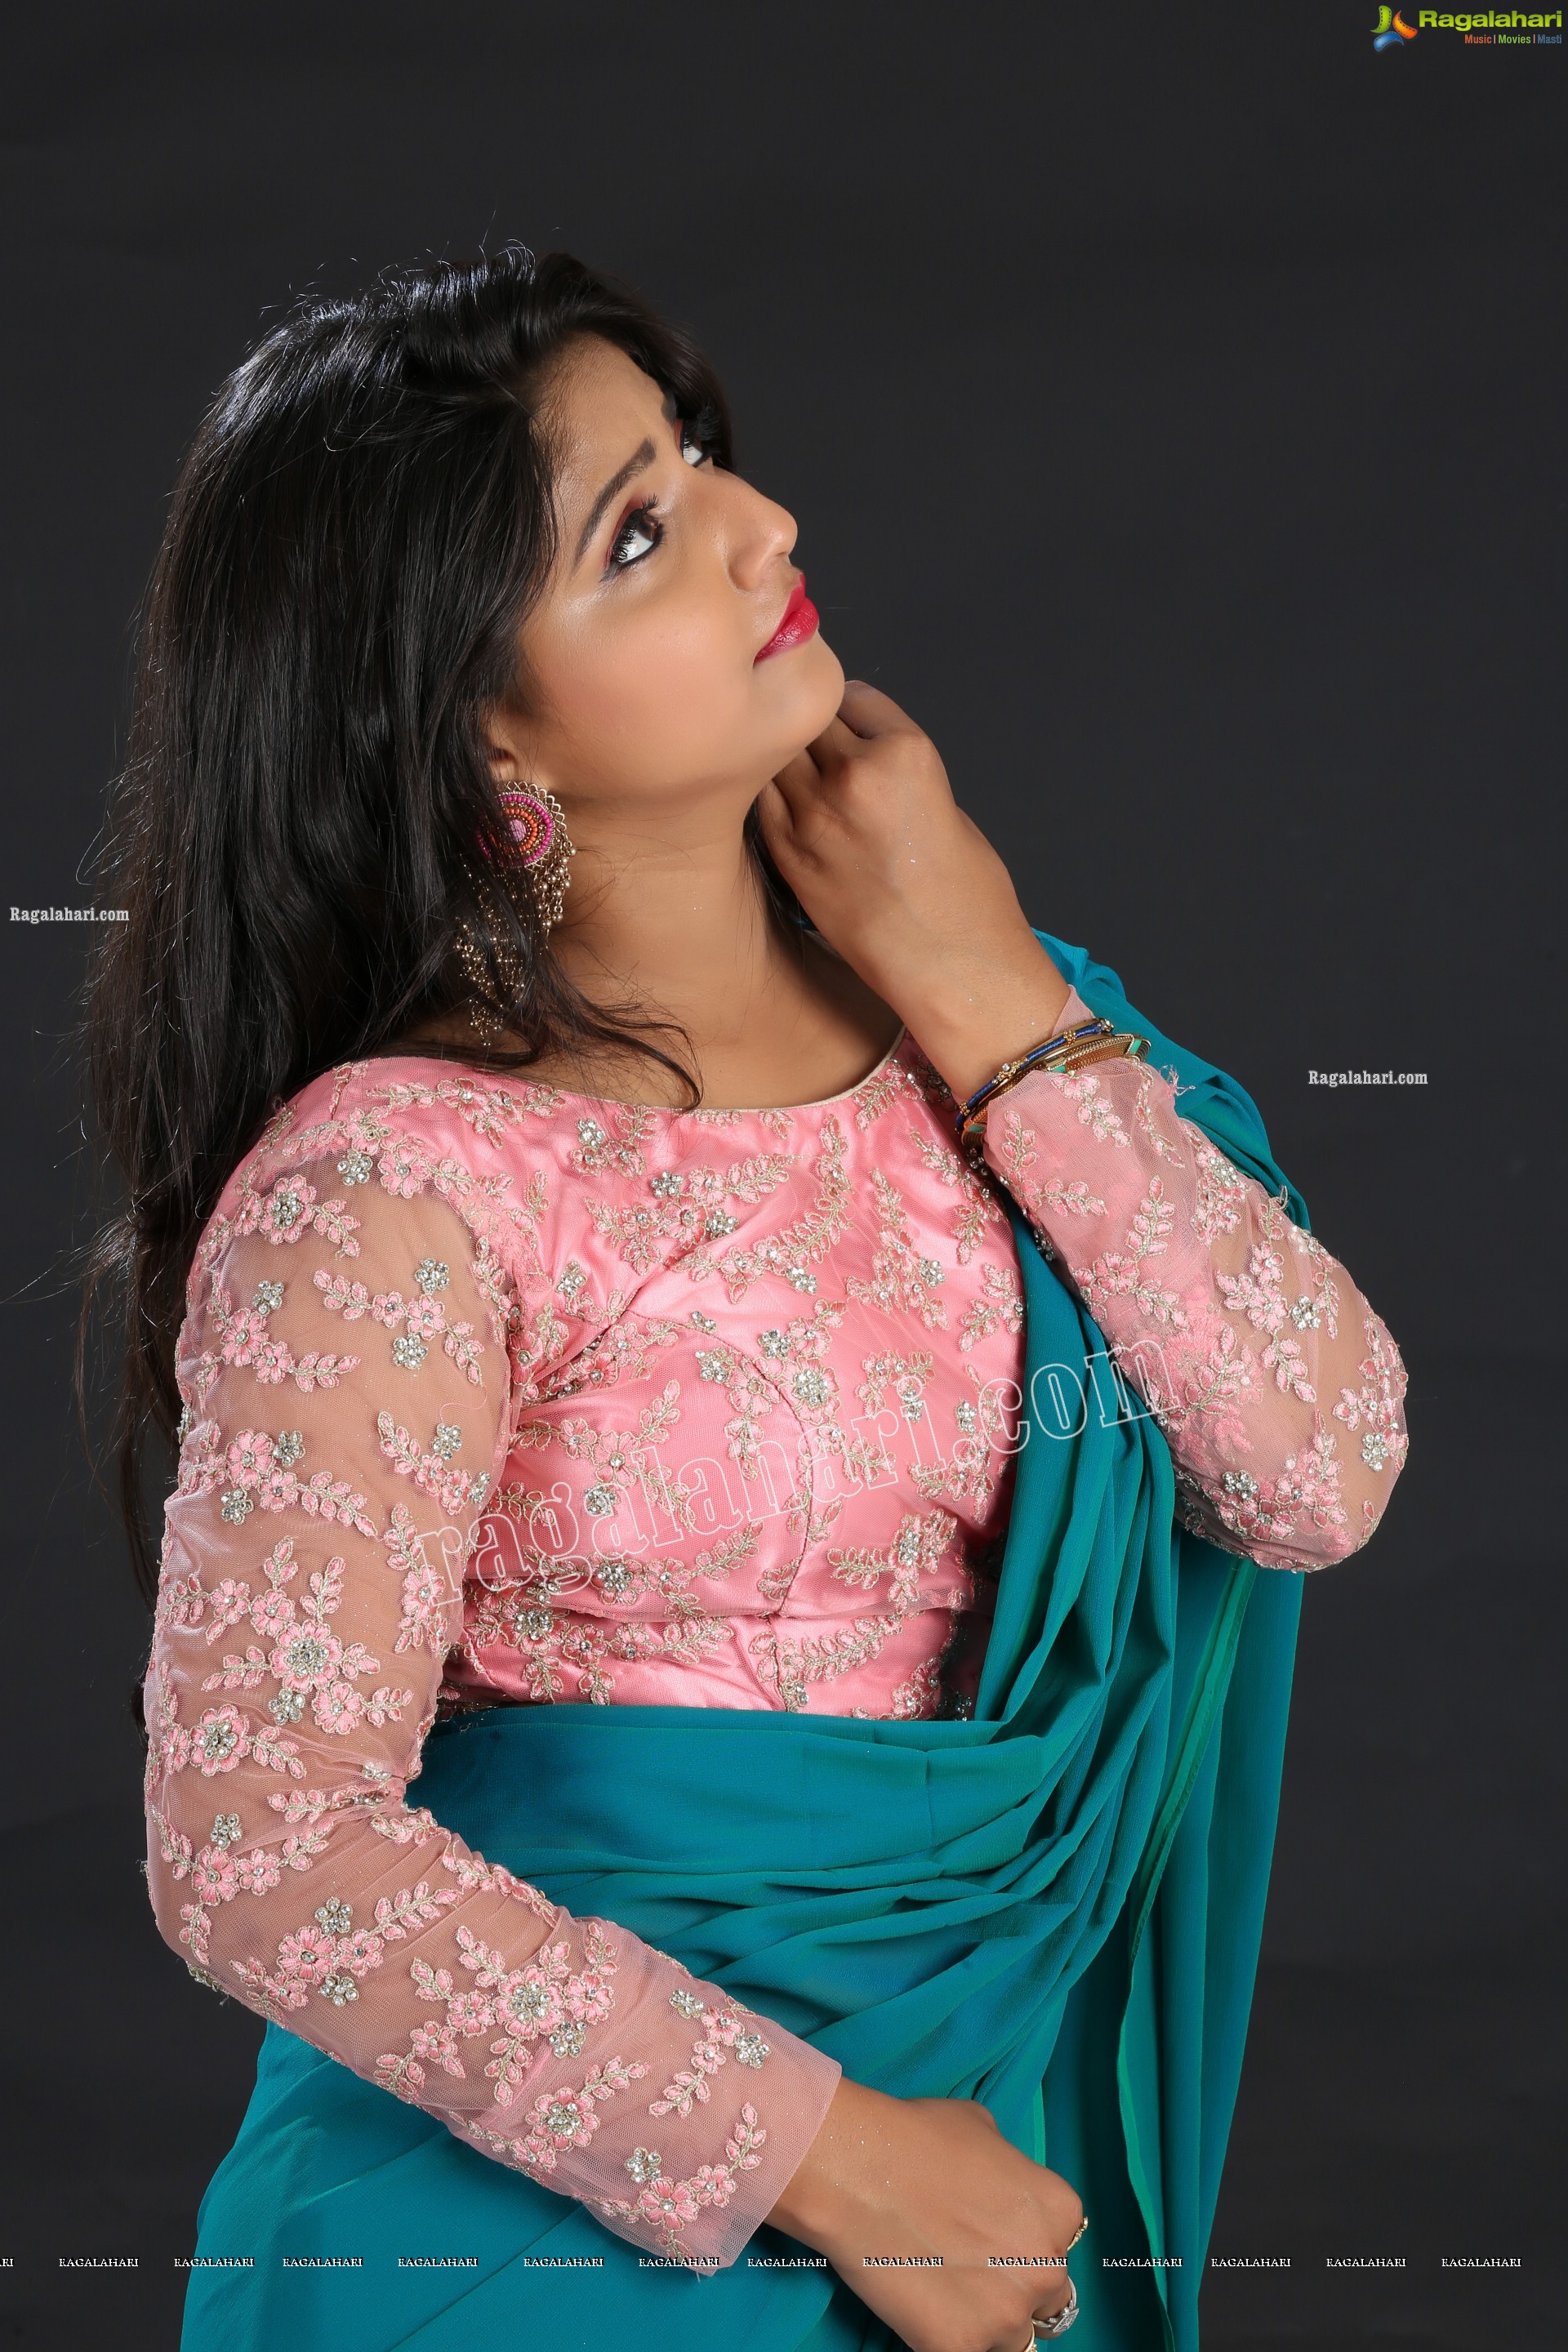 Shabeena Shaik in Light Blue Saree and Pink Blouse Exclusive Photo Shoot